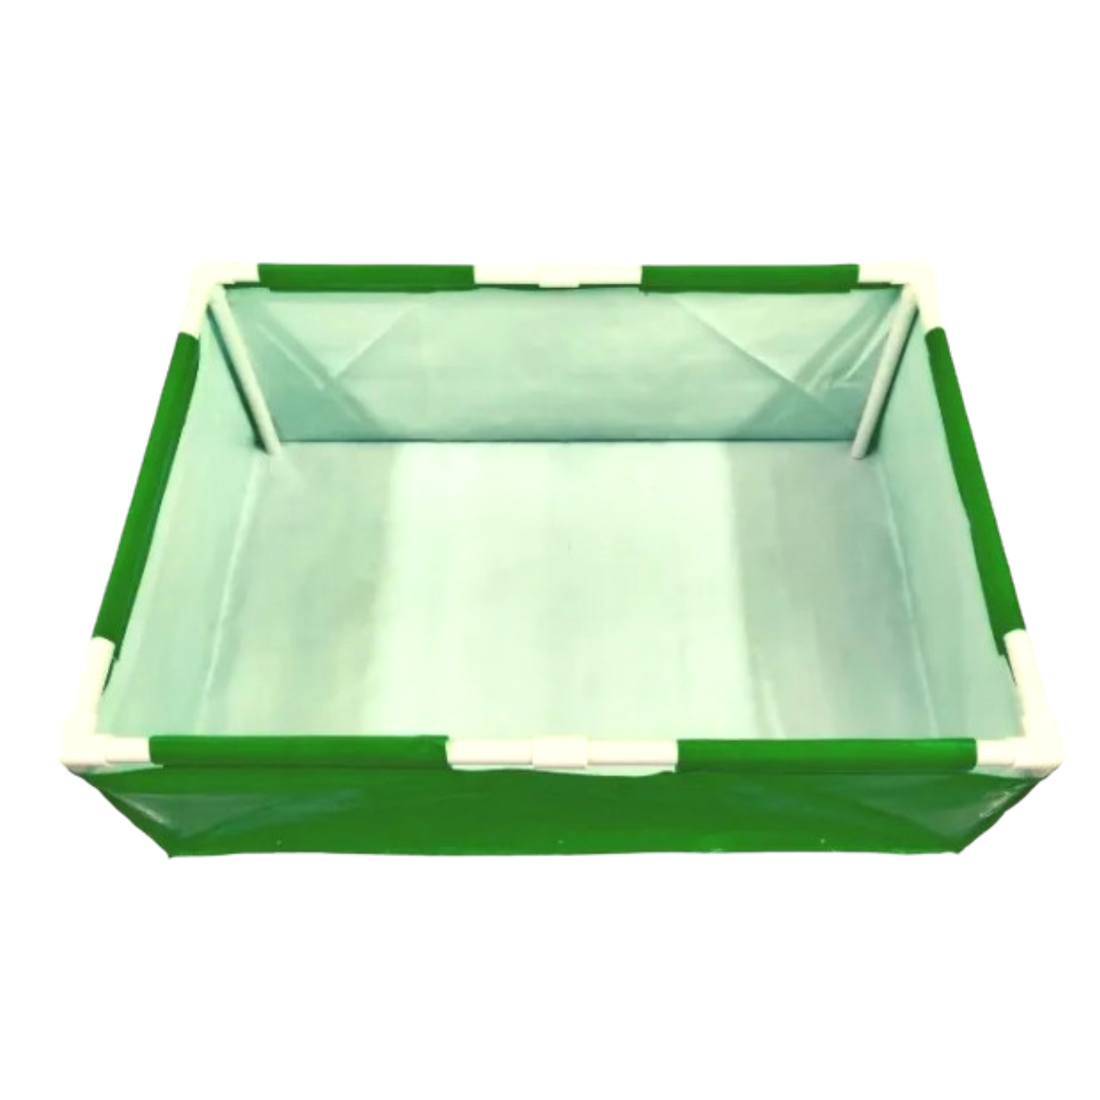 36x24x12 Inches (3x2x1 Ft) - 400 GSM HDPE Rectangular Grow Bag With Supporting PVC Pipes